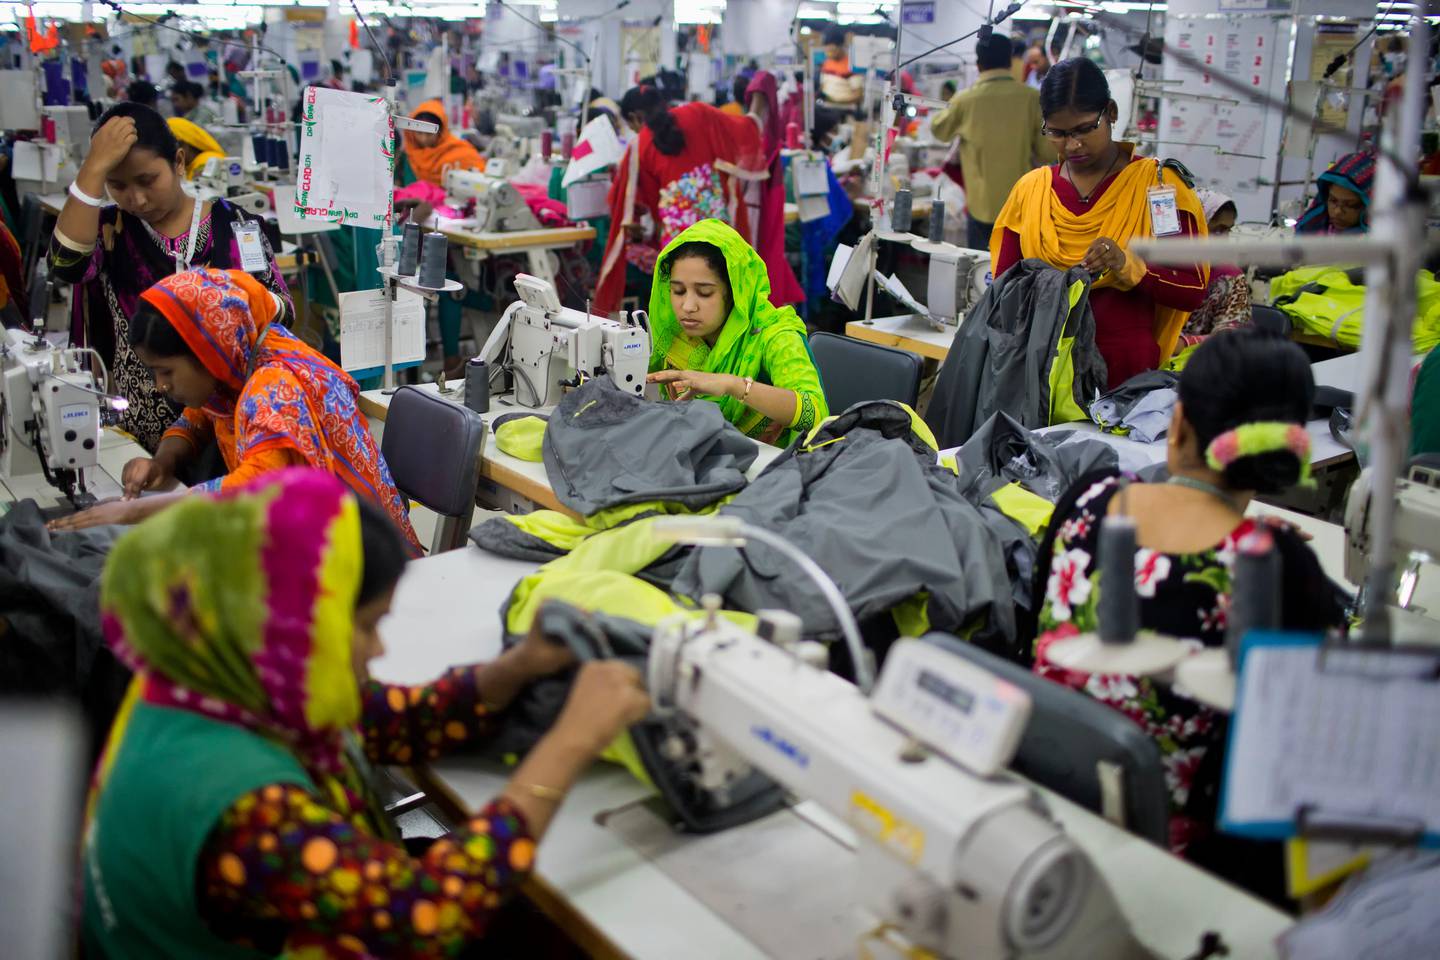 FILE - In this April 19, 2018 photo, Bangladeshis work at Snowtex garment factory in Dhamrai, near Dhaka, Bangladesh. A group set up by European clothing brands that has monitored factory safety in Bangladesh for years plans to leave, with its duties being assumed by a local group including unions and industry figures in the world's second-largest garment manufacturer. The European group and a separate North American group were formed after the collapse of Rana Plaza, a building housing five garment factories that made clothing for international brands. The departure, which officials said Thursday, Jan. 16, 2019, was planned for May, follows a protracted tussle with garment manufacturers who wanted Bangladesh's government to form a local watch group to monitor the sector. (AP Photo/A.M. Ahad, File)